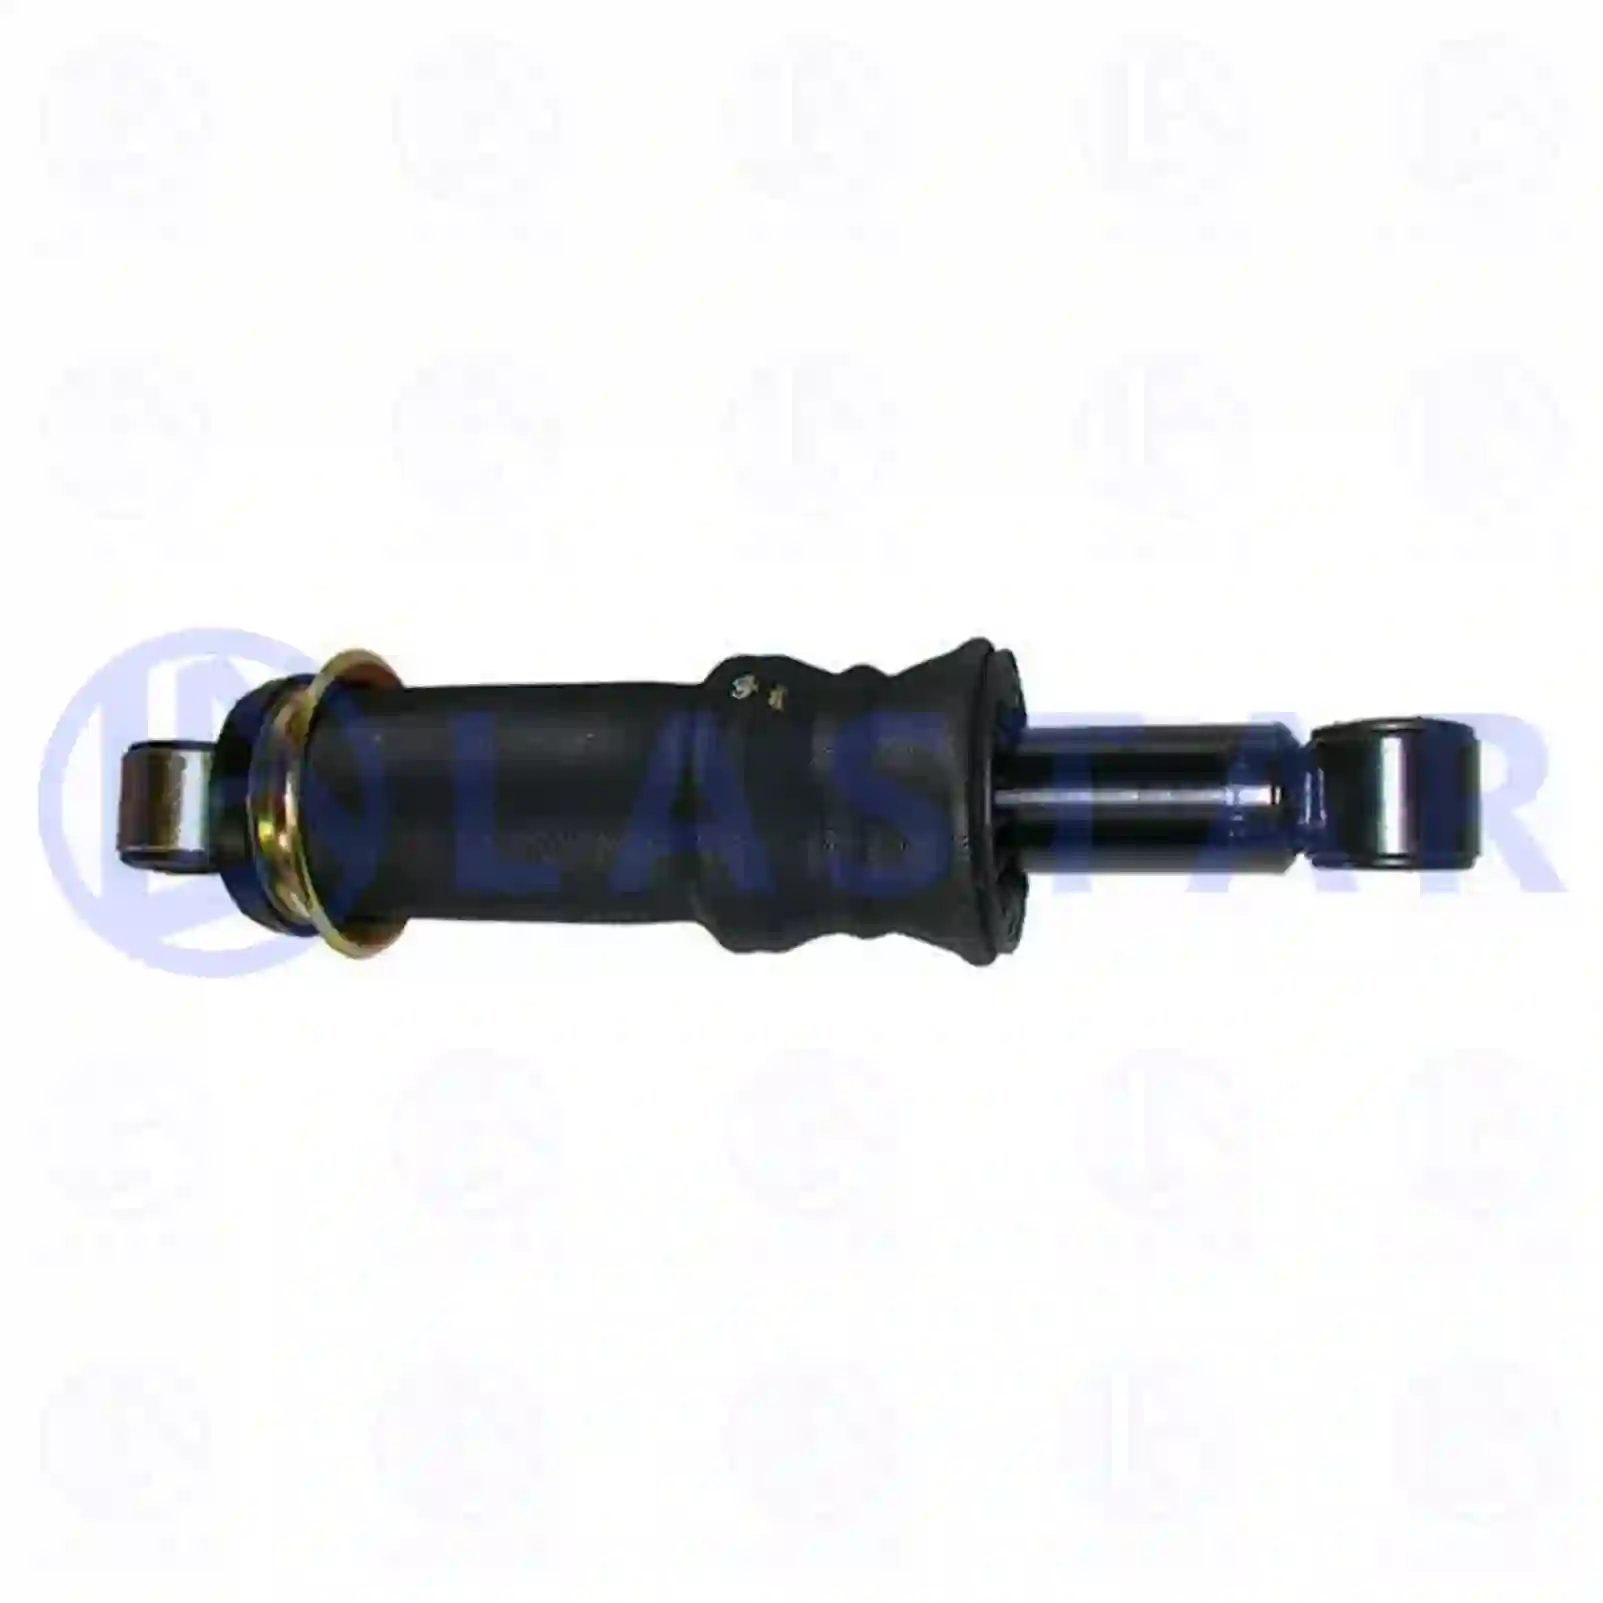 Cabin shock absorber, with air bellow, 77734732, 1075076, 1075077, 1629725, , ||  77734732 Lastar Spare Part | Truck Spare Parts, Auotomotive Spare Parts Cabin shock absorber, with air bellow, 77734732, 1075076, 1075077, 1629725, , ||  77734732 Lastar Spare Part | Truck Spare Parts, Auotomotive Spare Parts